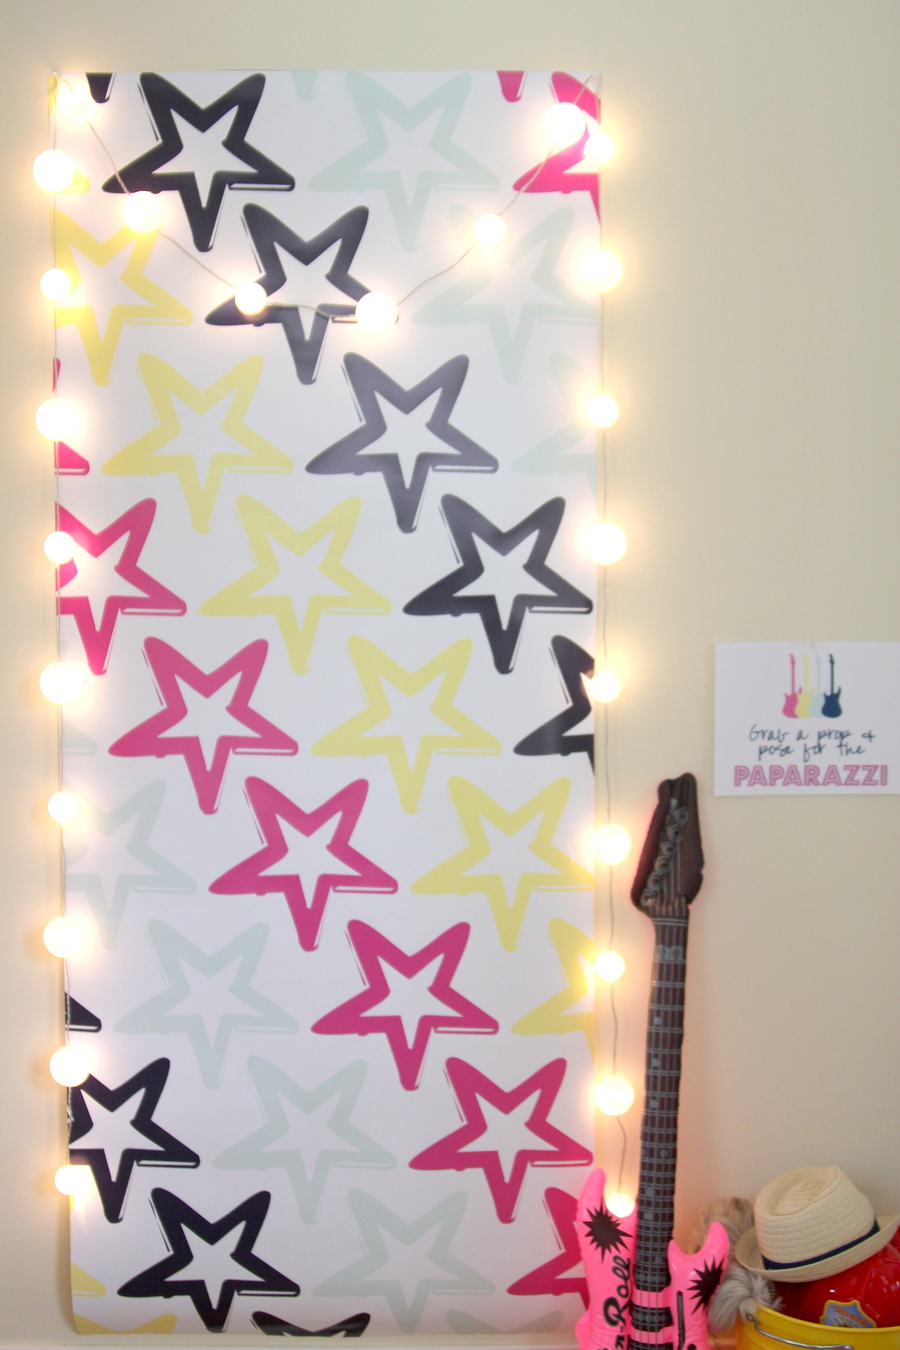 Time to party like a rock star! This sweet rock star birthday party includes all sorts of party ideas- like this cute 'paparazzi' photo booth!